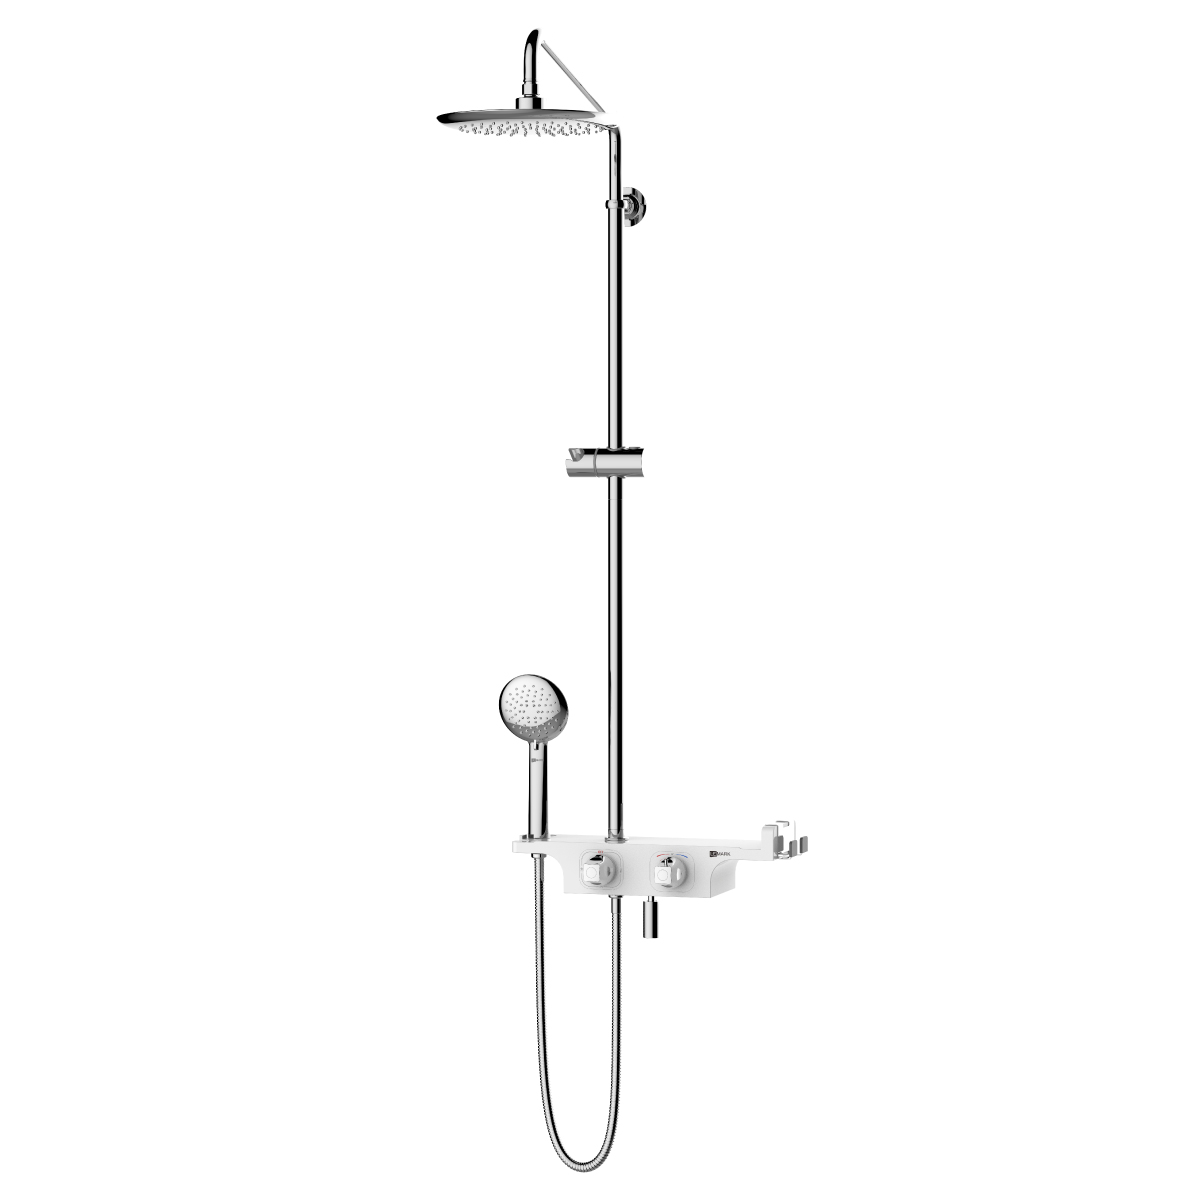 LM7008C Thermostatic bath and shower faucet with adjustable rod height, swivel spout and «Tropical rain» shower head